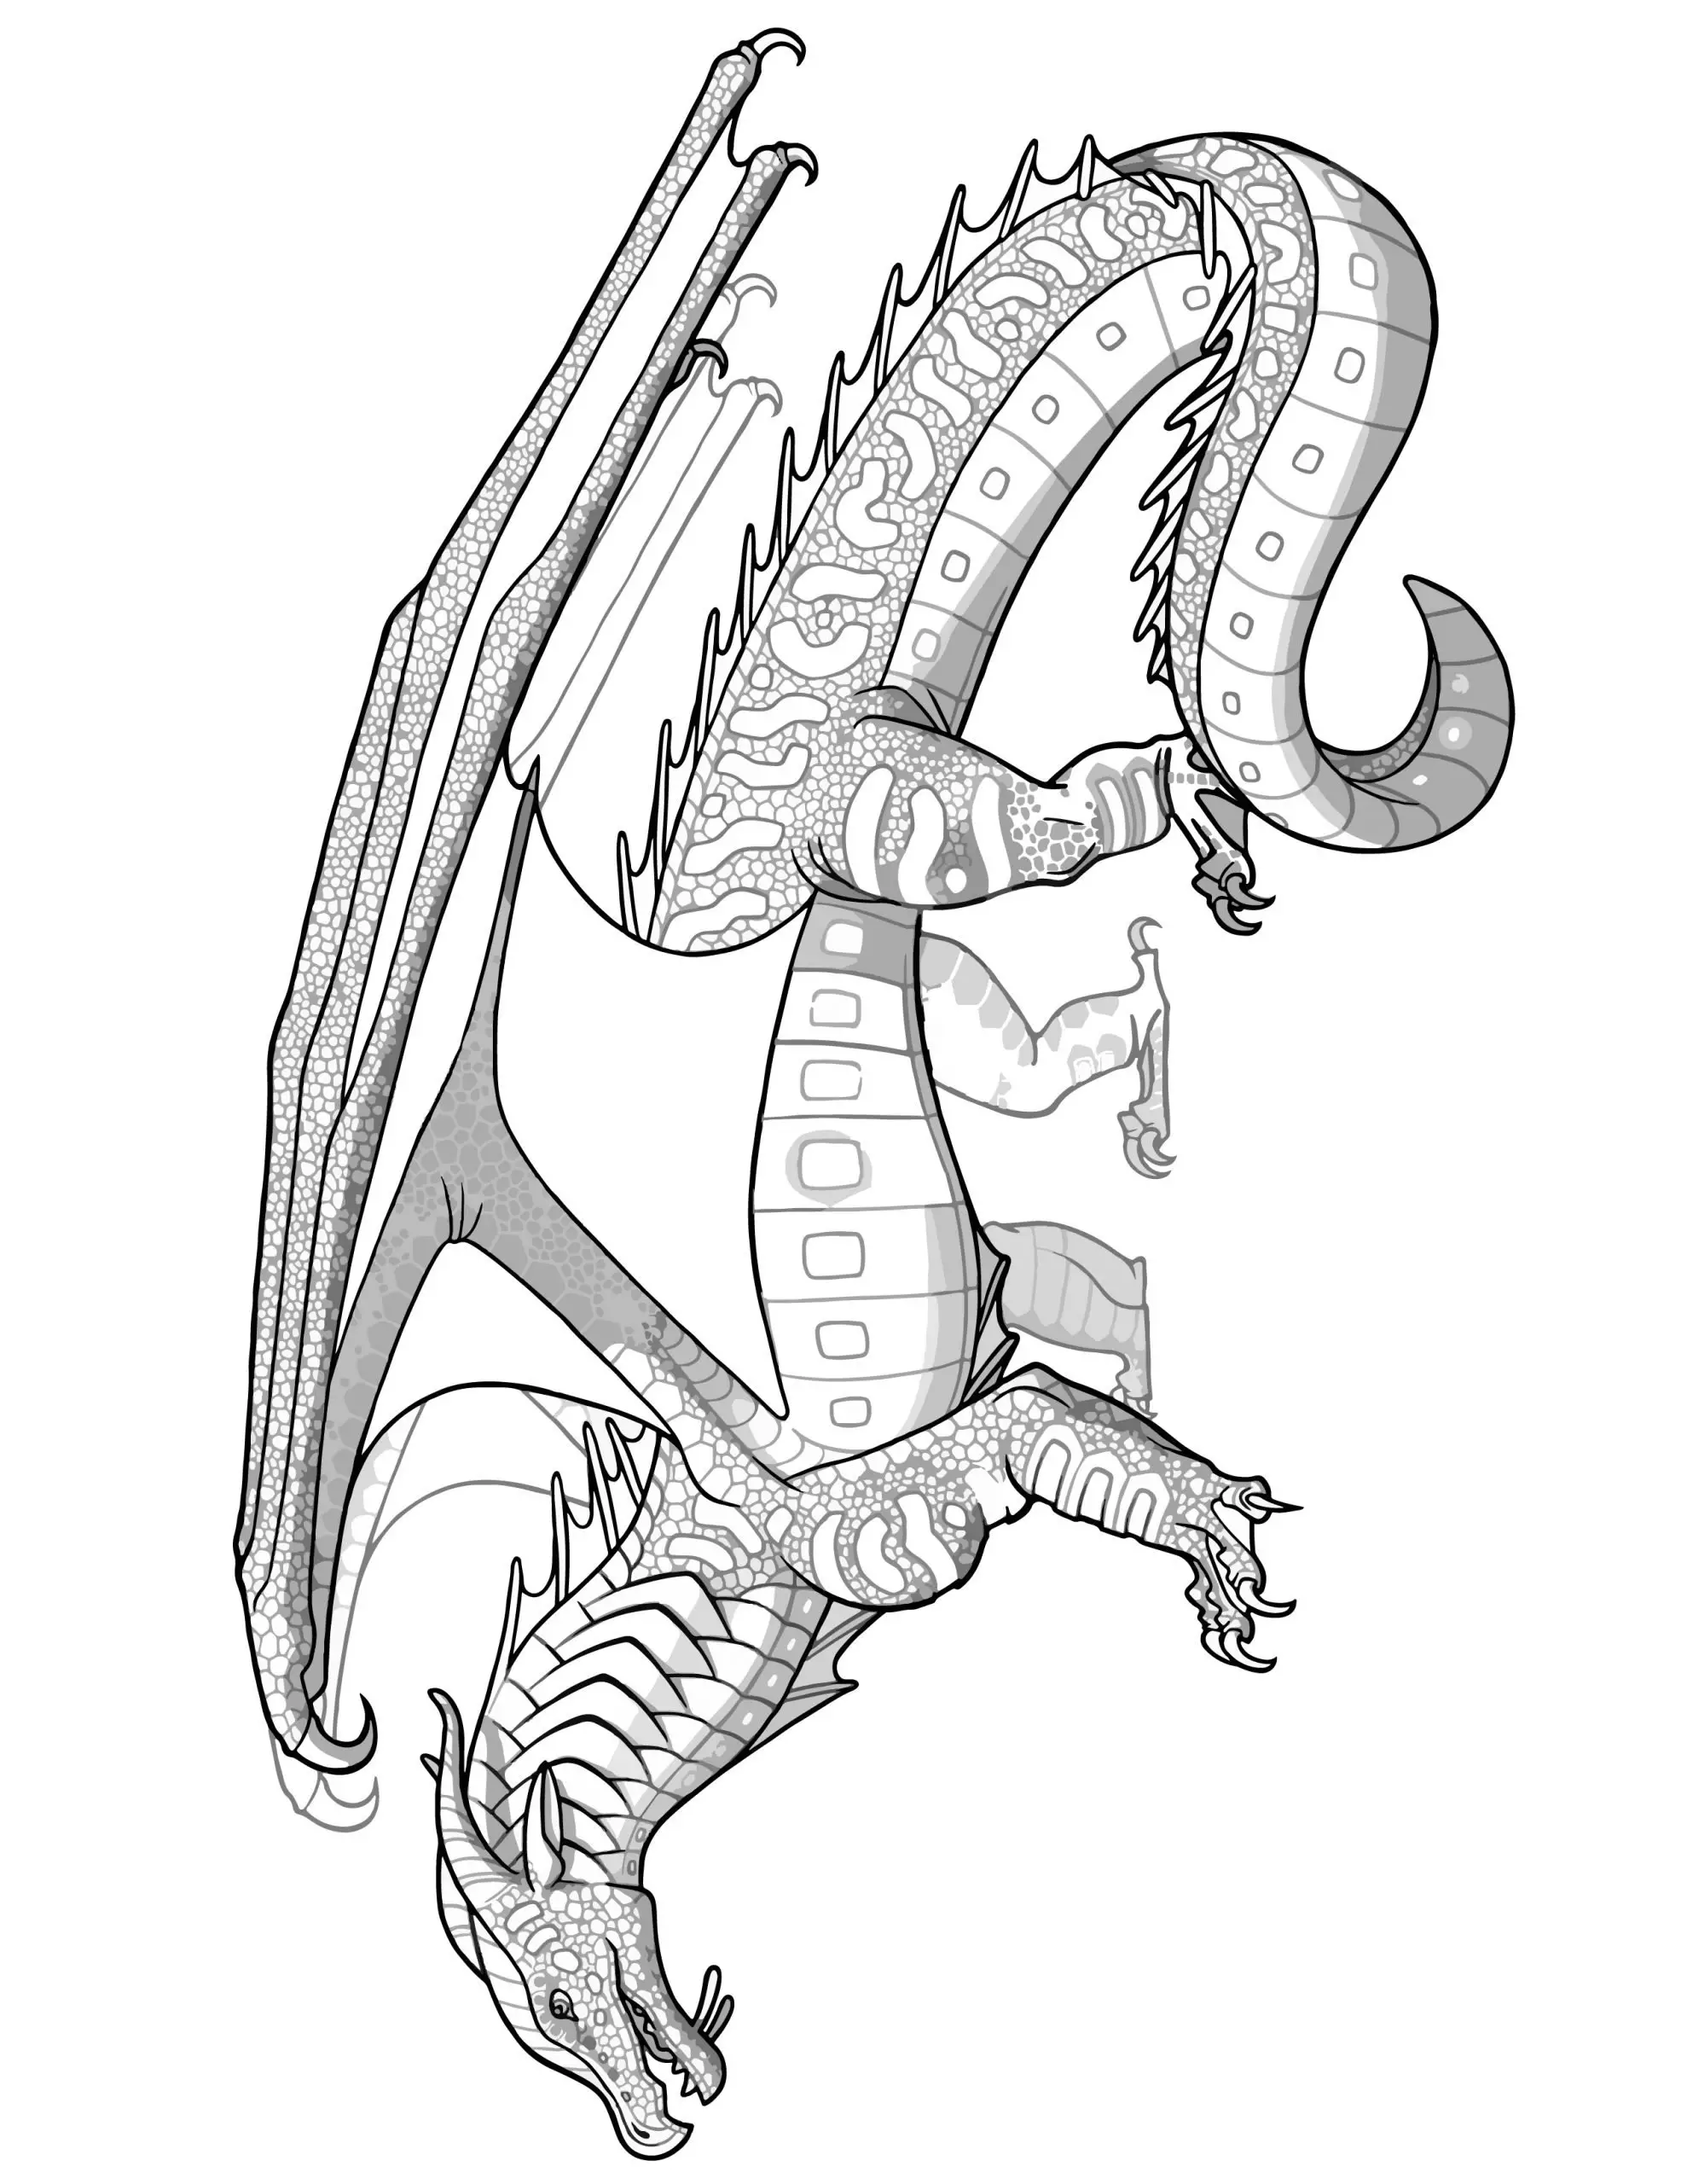 SEAWING Dragon Coloring Page Transparent Wings of Fire Coloring SHEET Pyrrhian Dragon Tribe